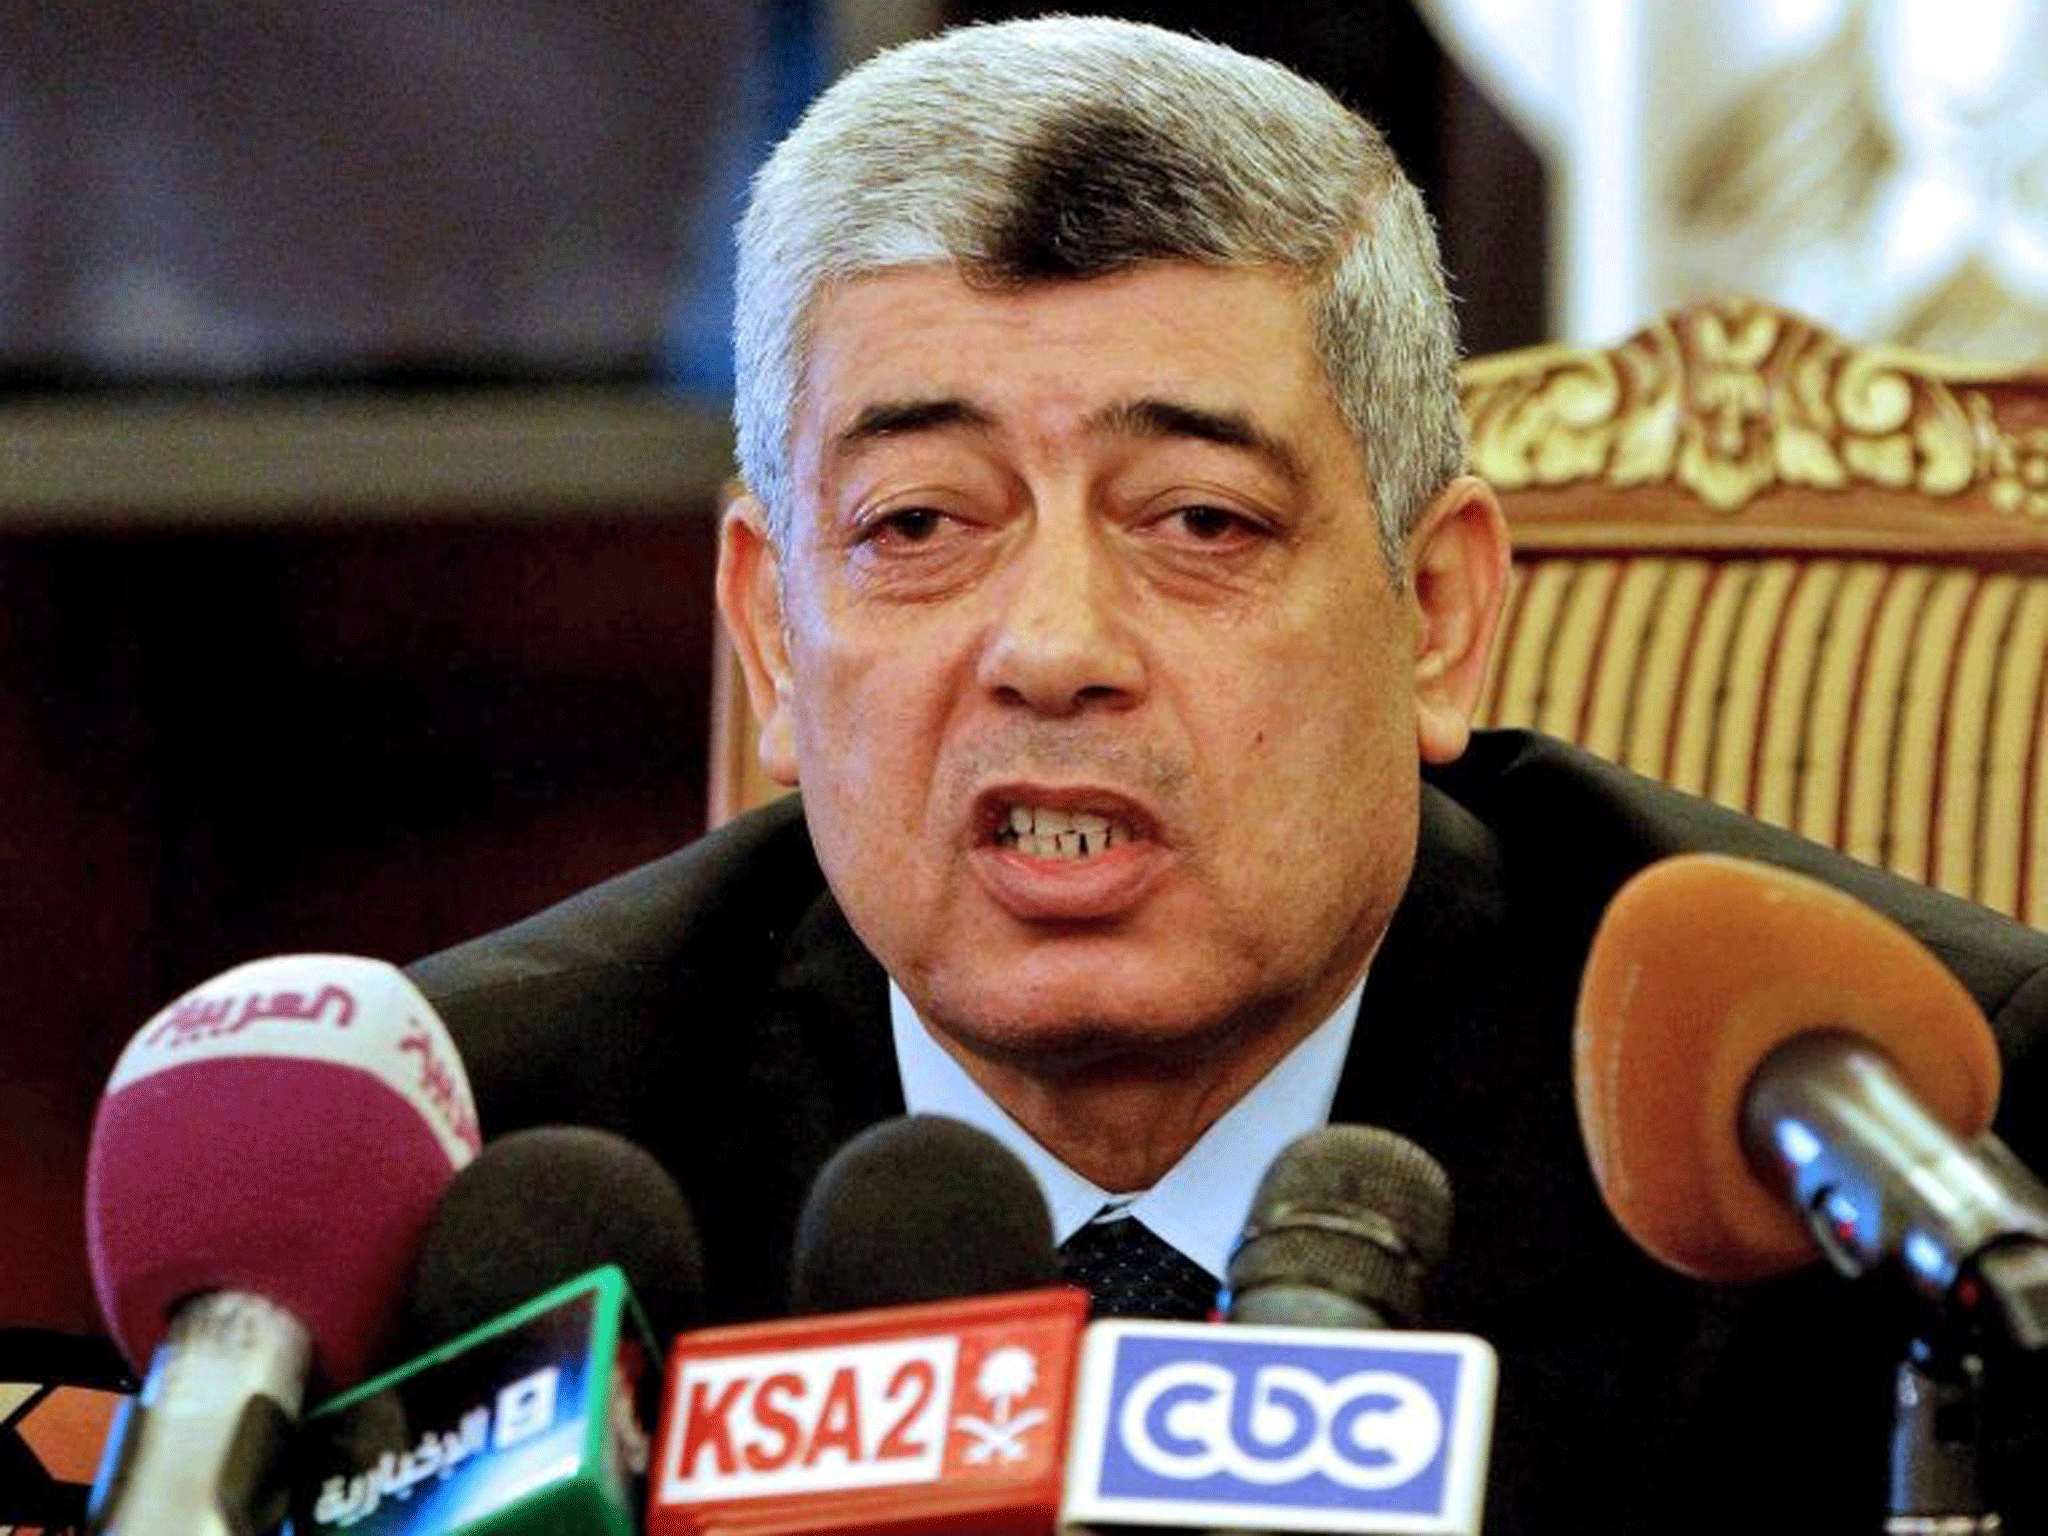 Egypt's interior minister Mohammed Ibrahim, seen here giving a press conference in July, was unharmed by the explosion